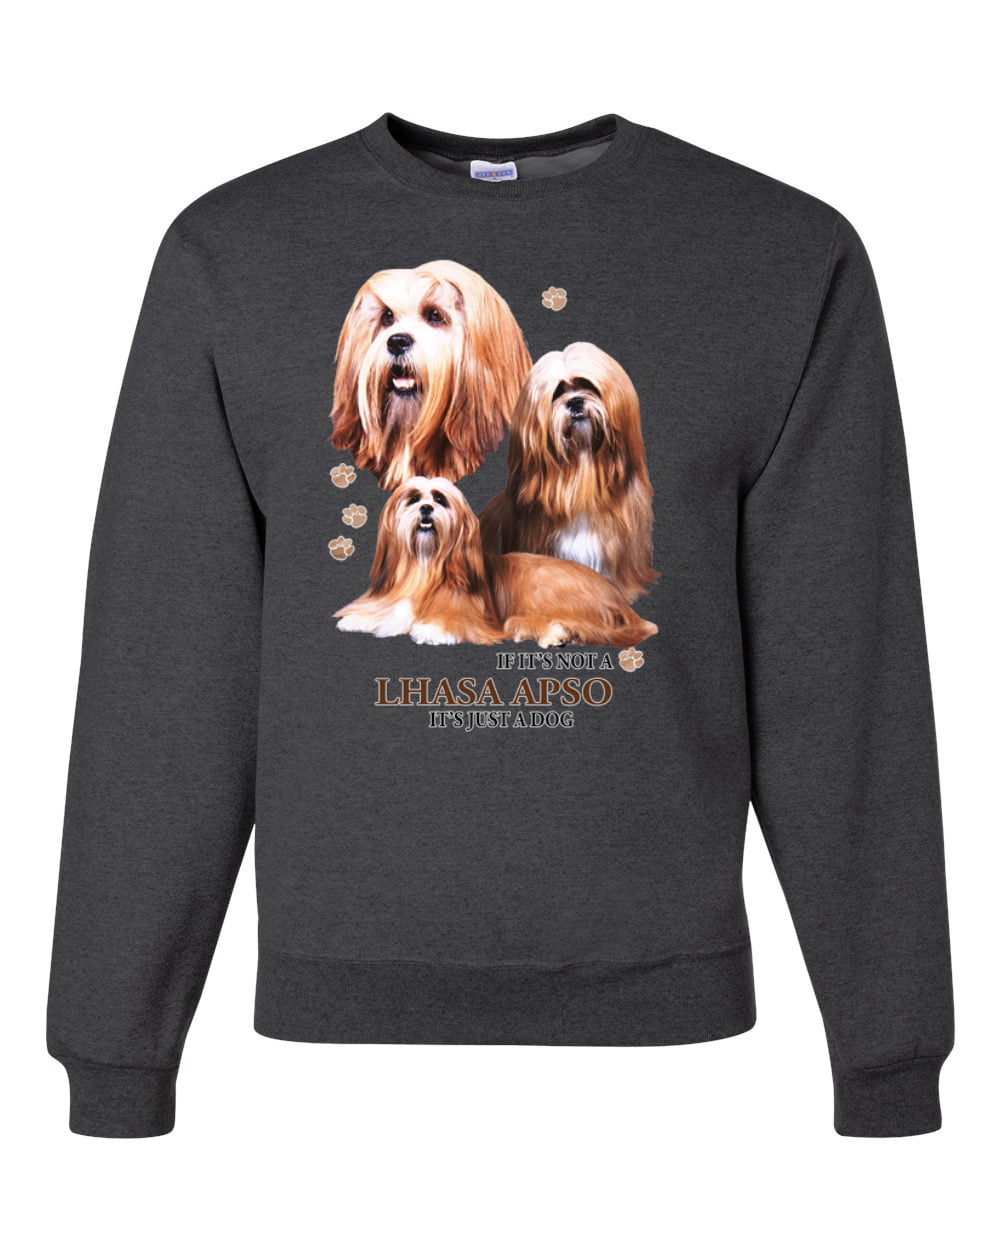 Graphic Pullover Sweater Women Great Gift and FREE SHIPPING Unisex Basset Hound Dog in Native Indian Headdress Men Sweatshirt